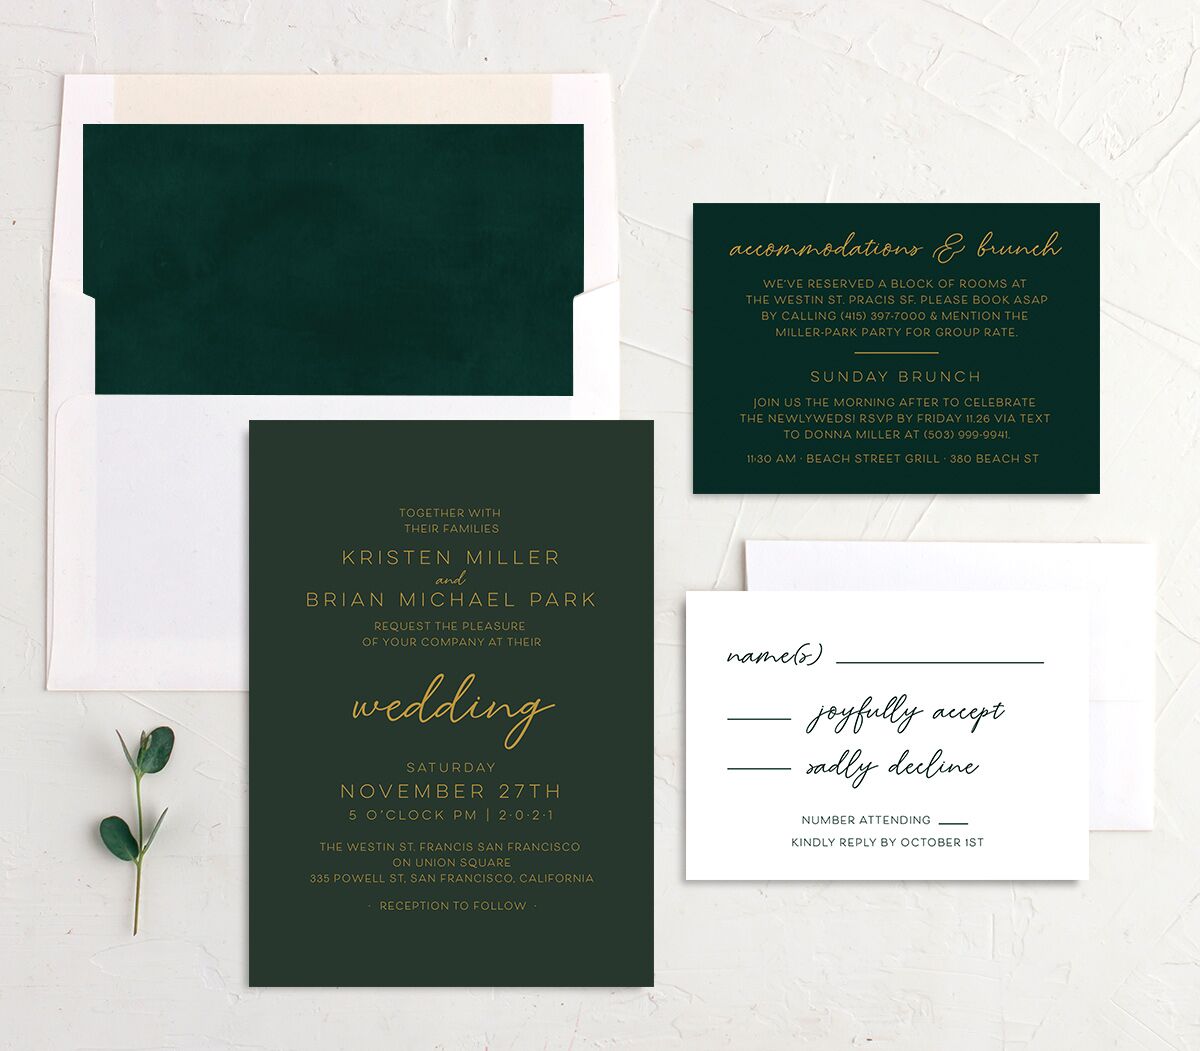 Gold Calligraphy Wedding Invitations suite in Green